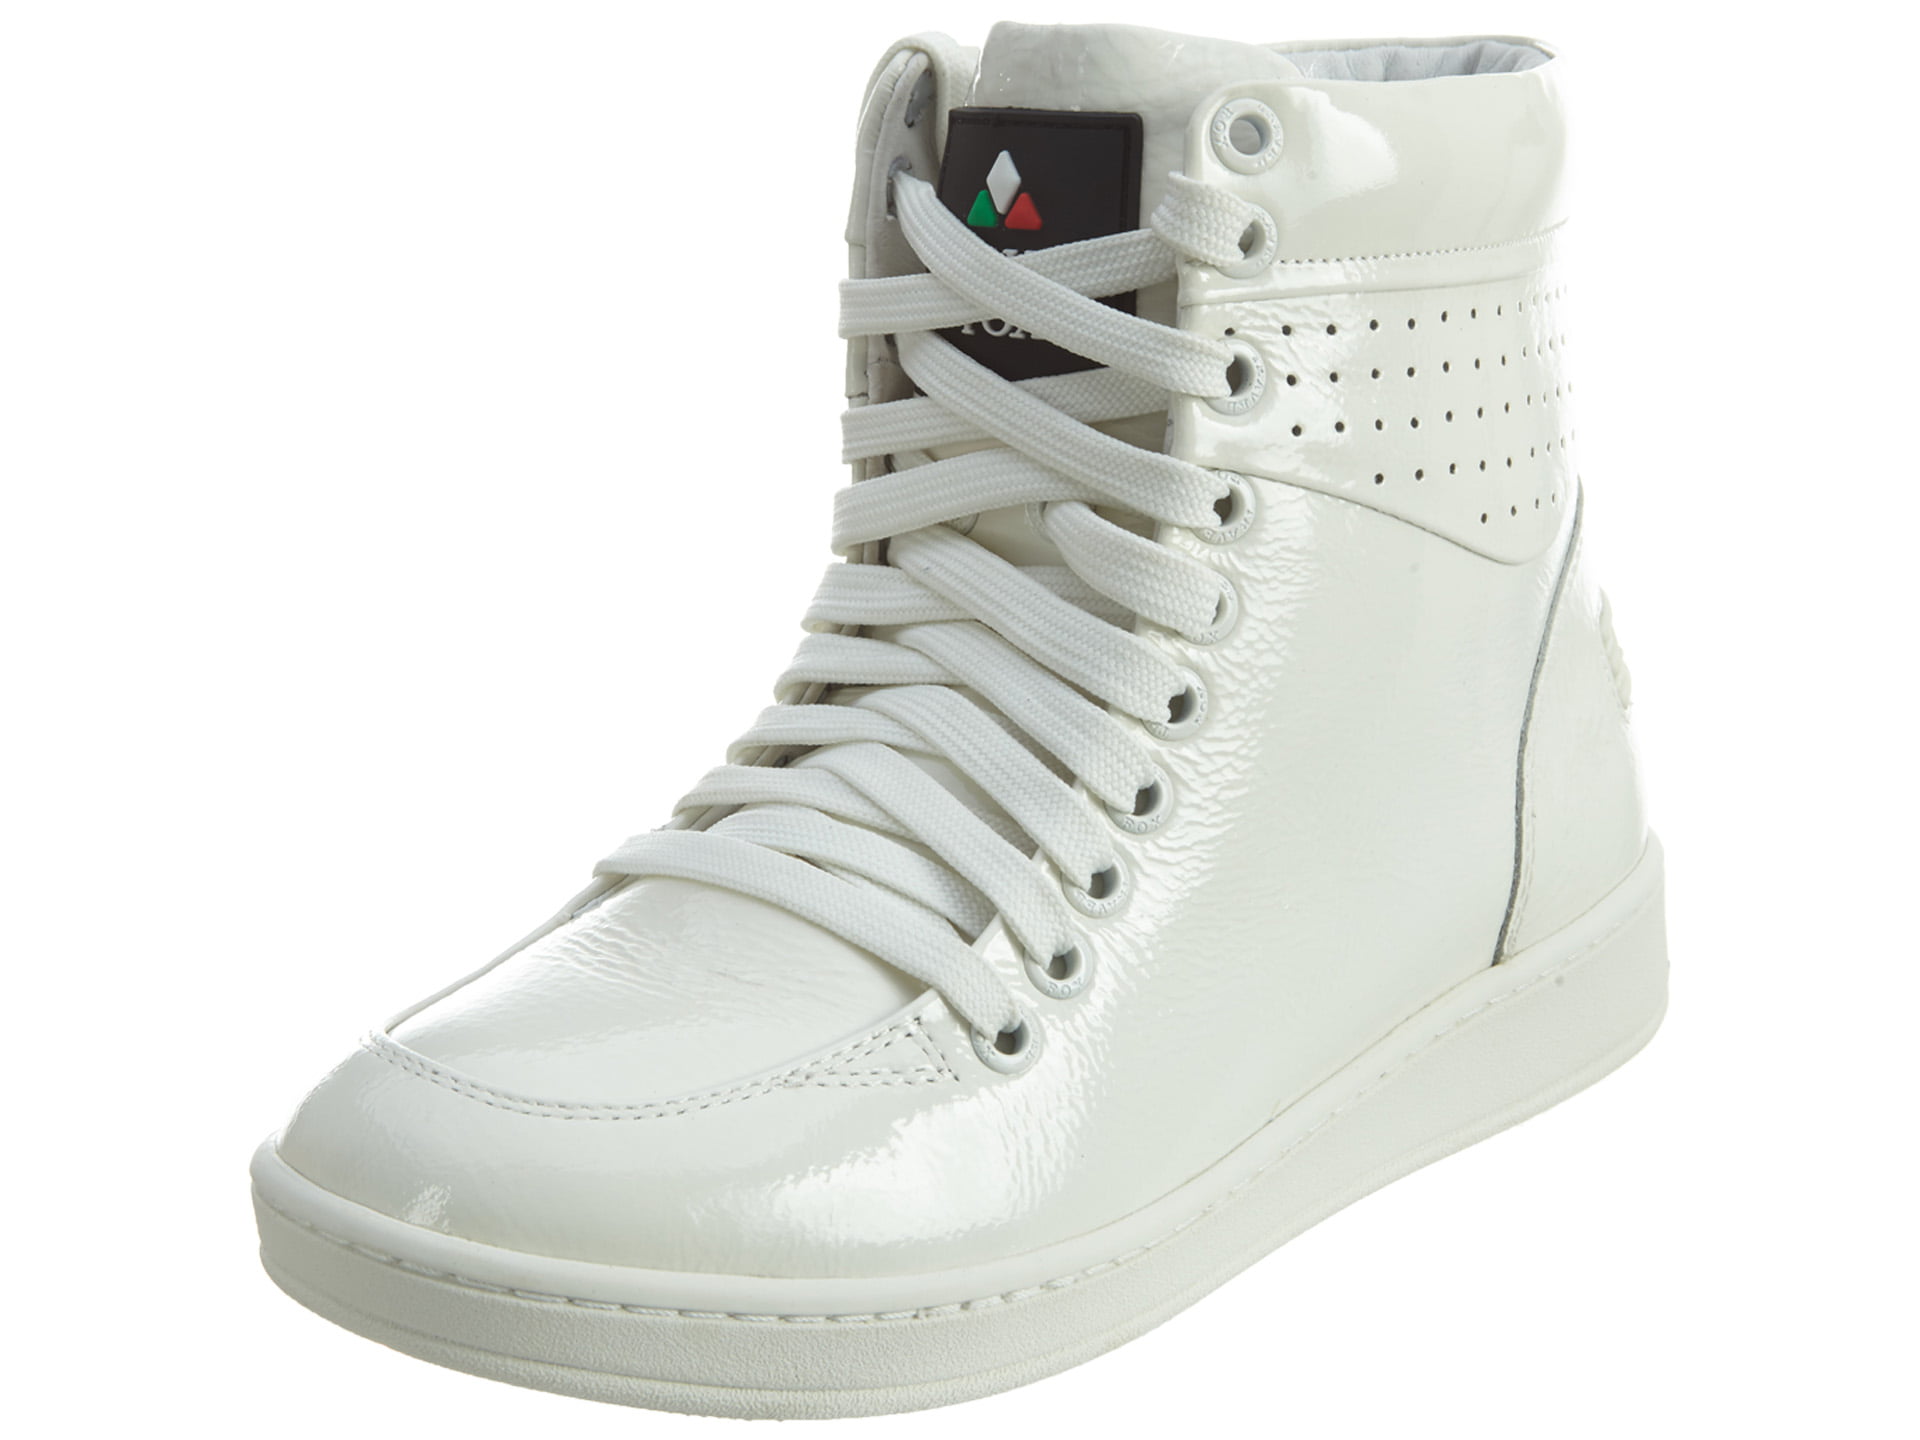 TRAVEL FOX Unisex 900 Nappa Leather Round Toe Lace-Up High-Tops 